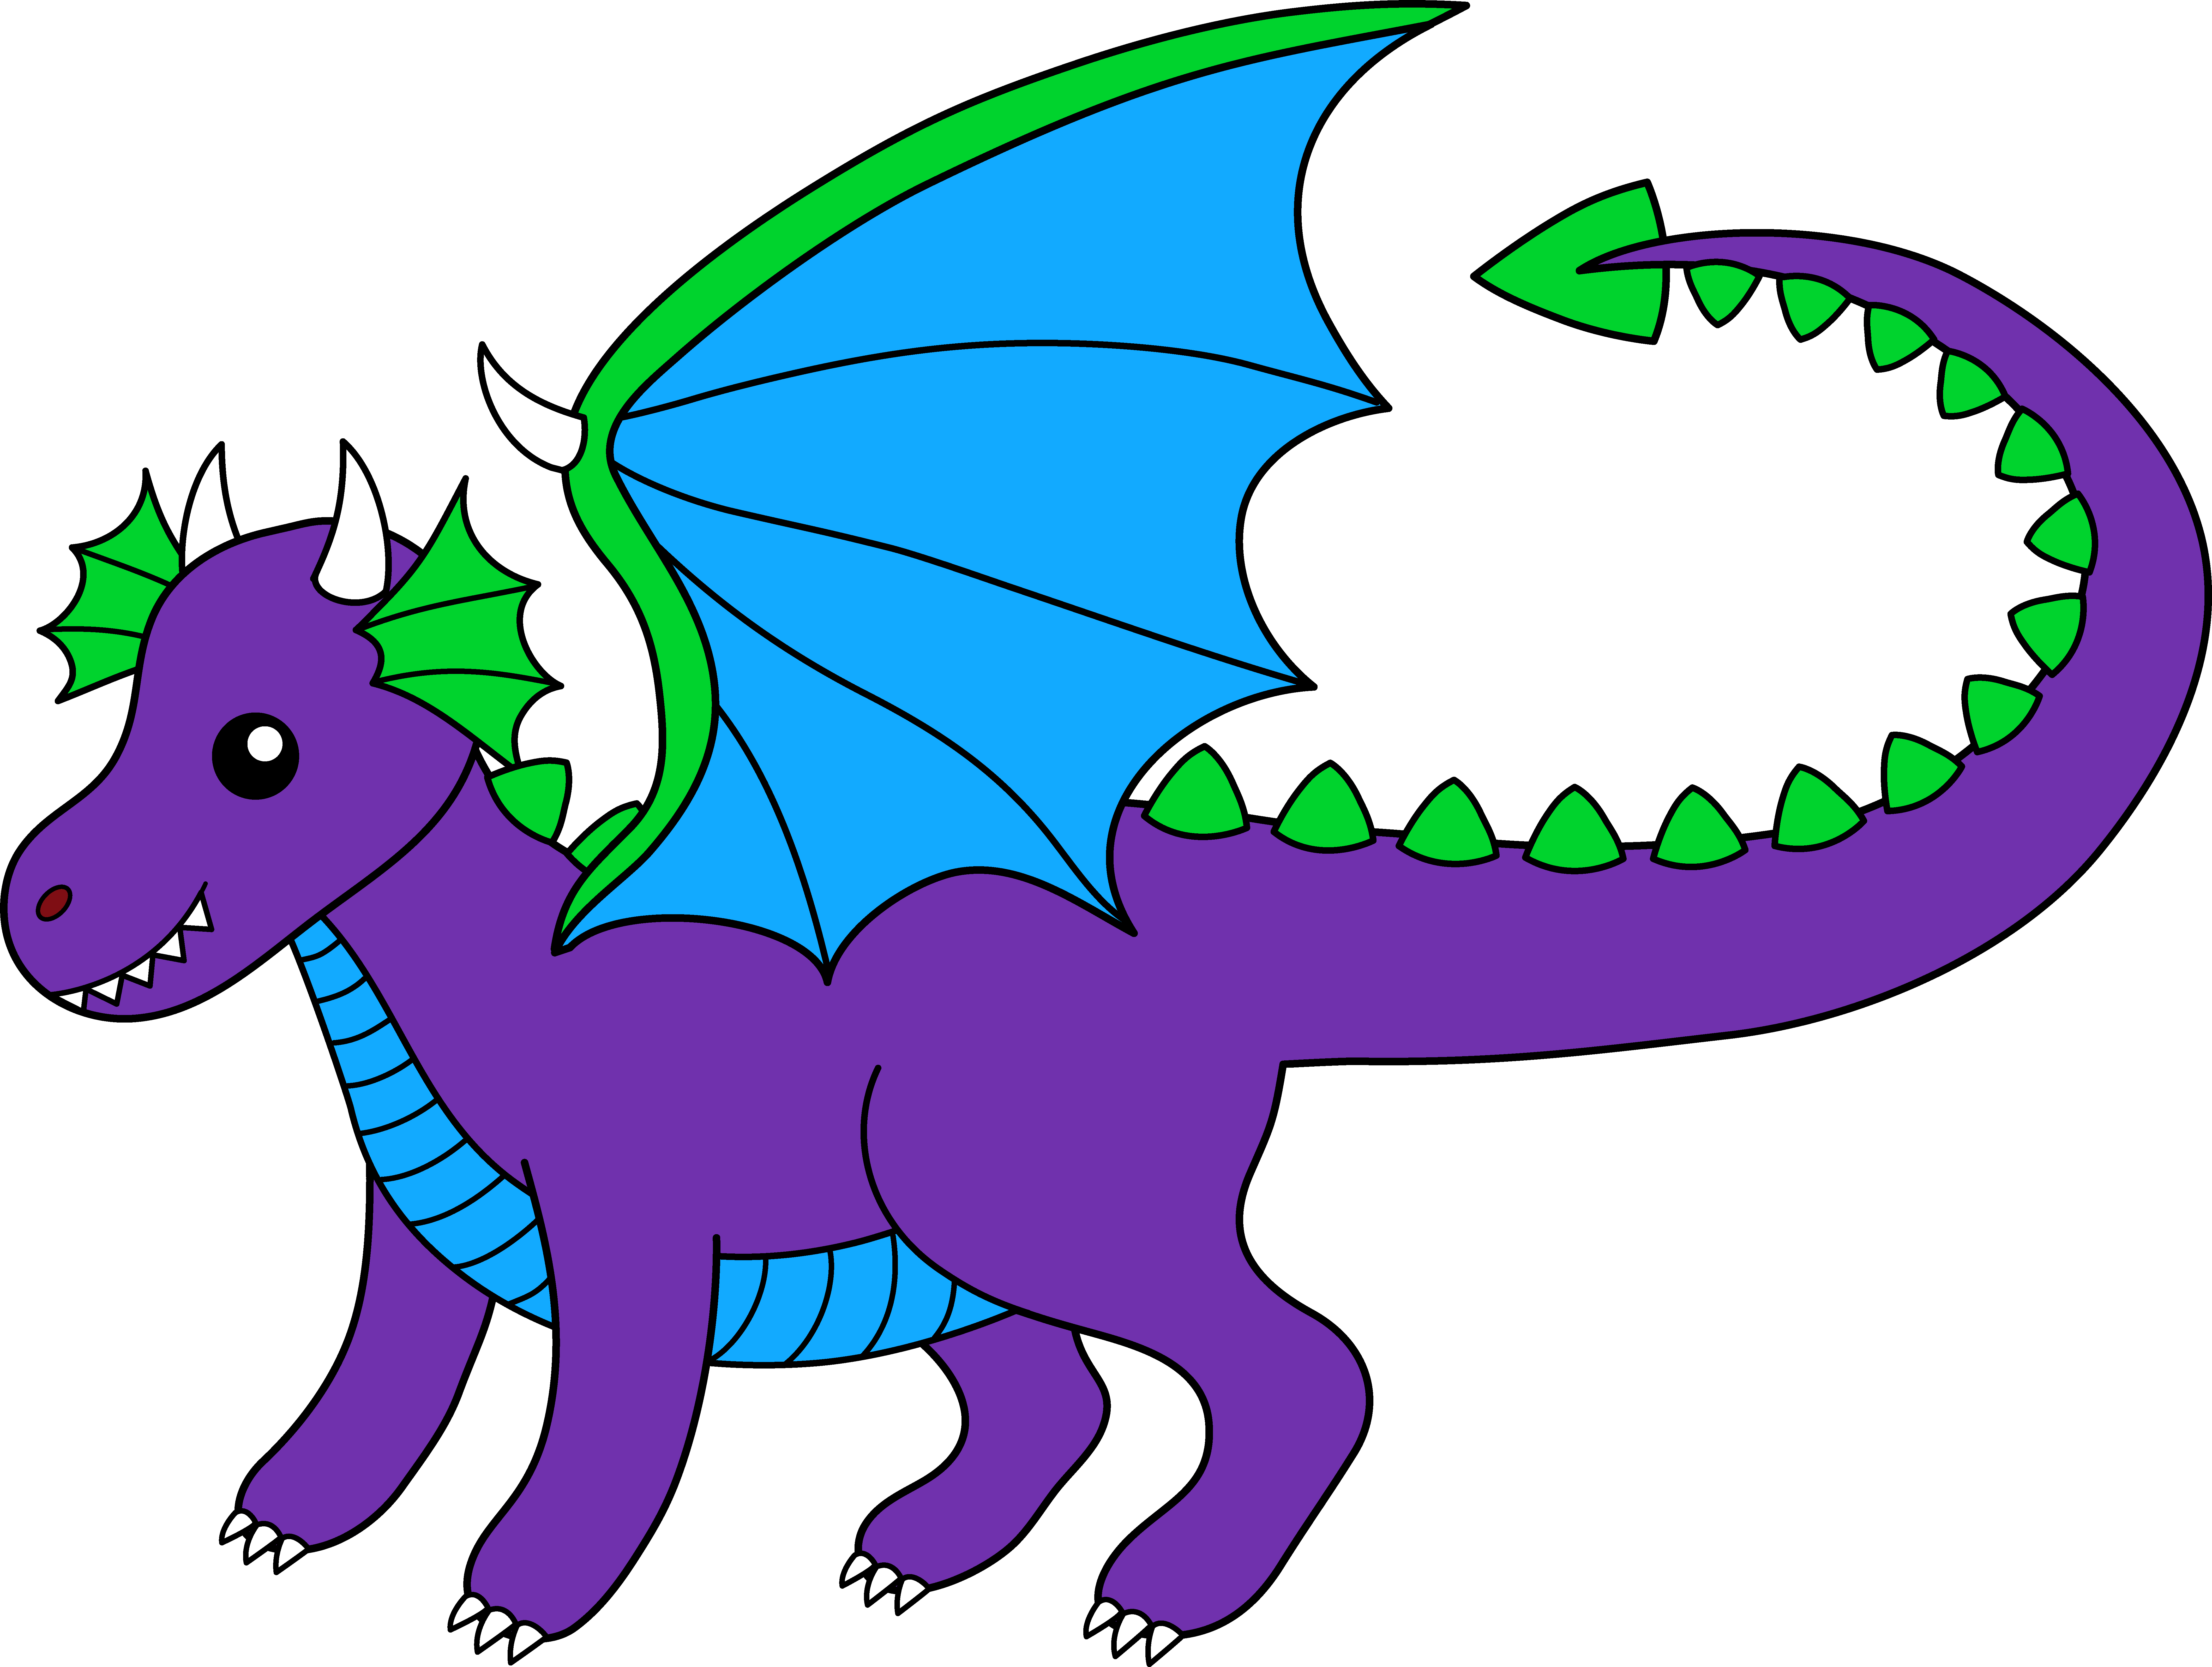 Dragon Clip Art Images Free - Free Clipart Images